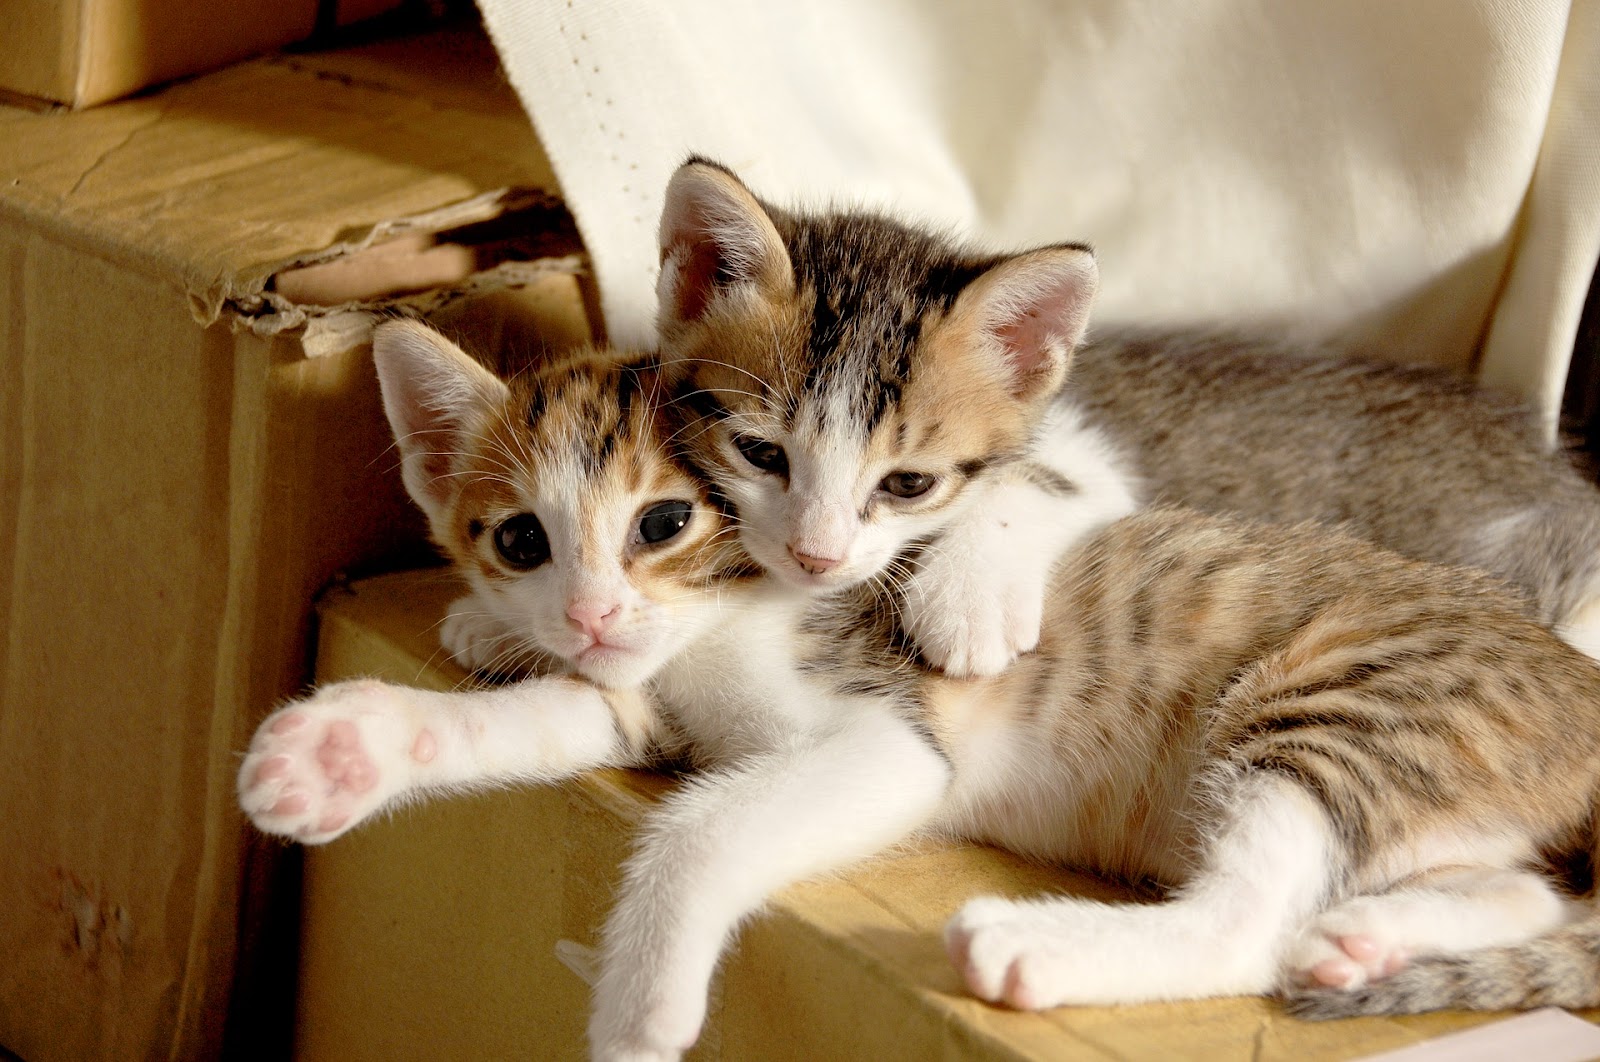 kittens in kitten stage cuddling, laying on a box